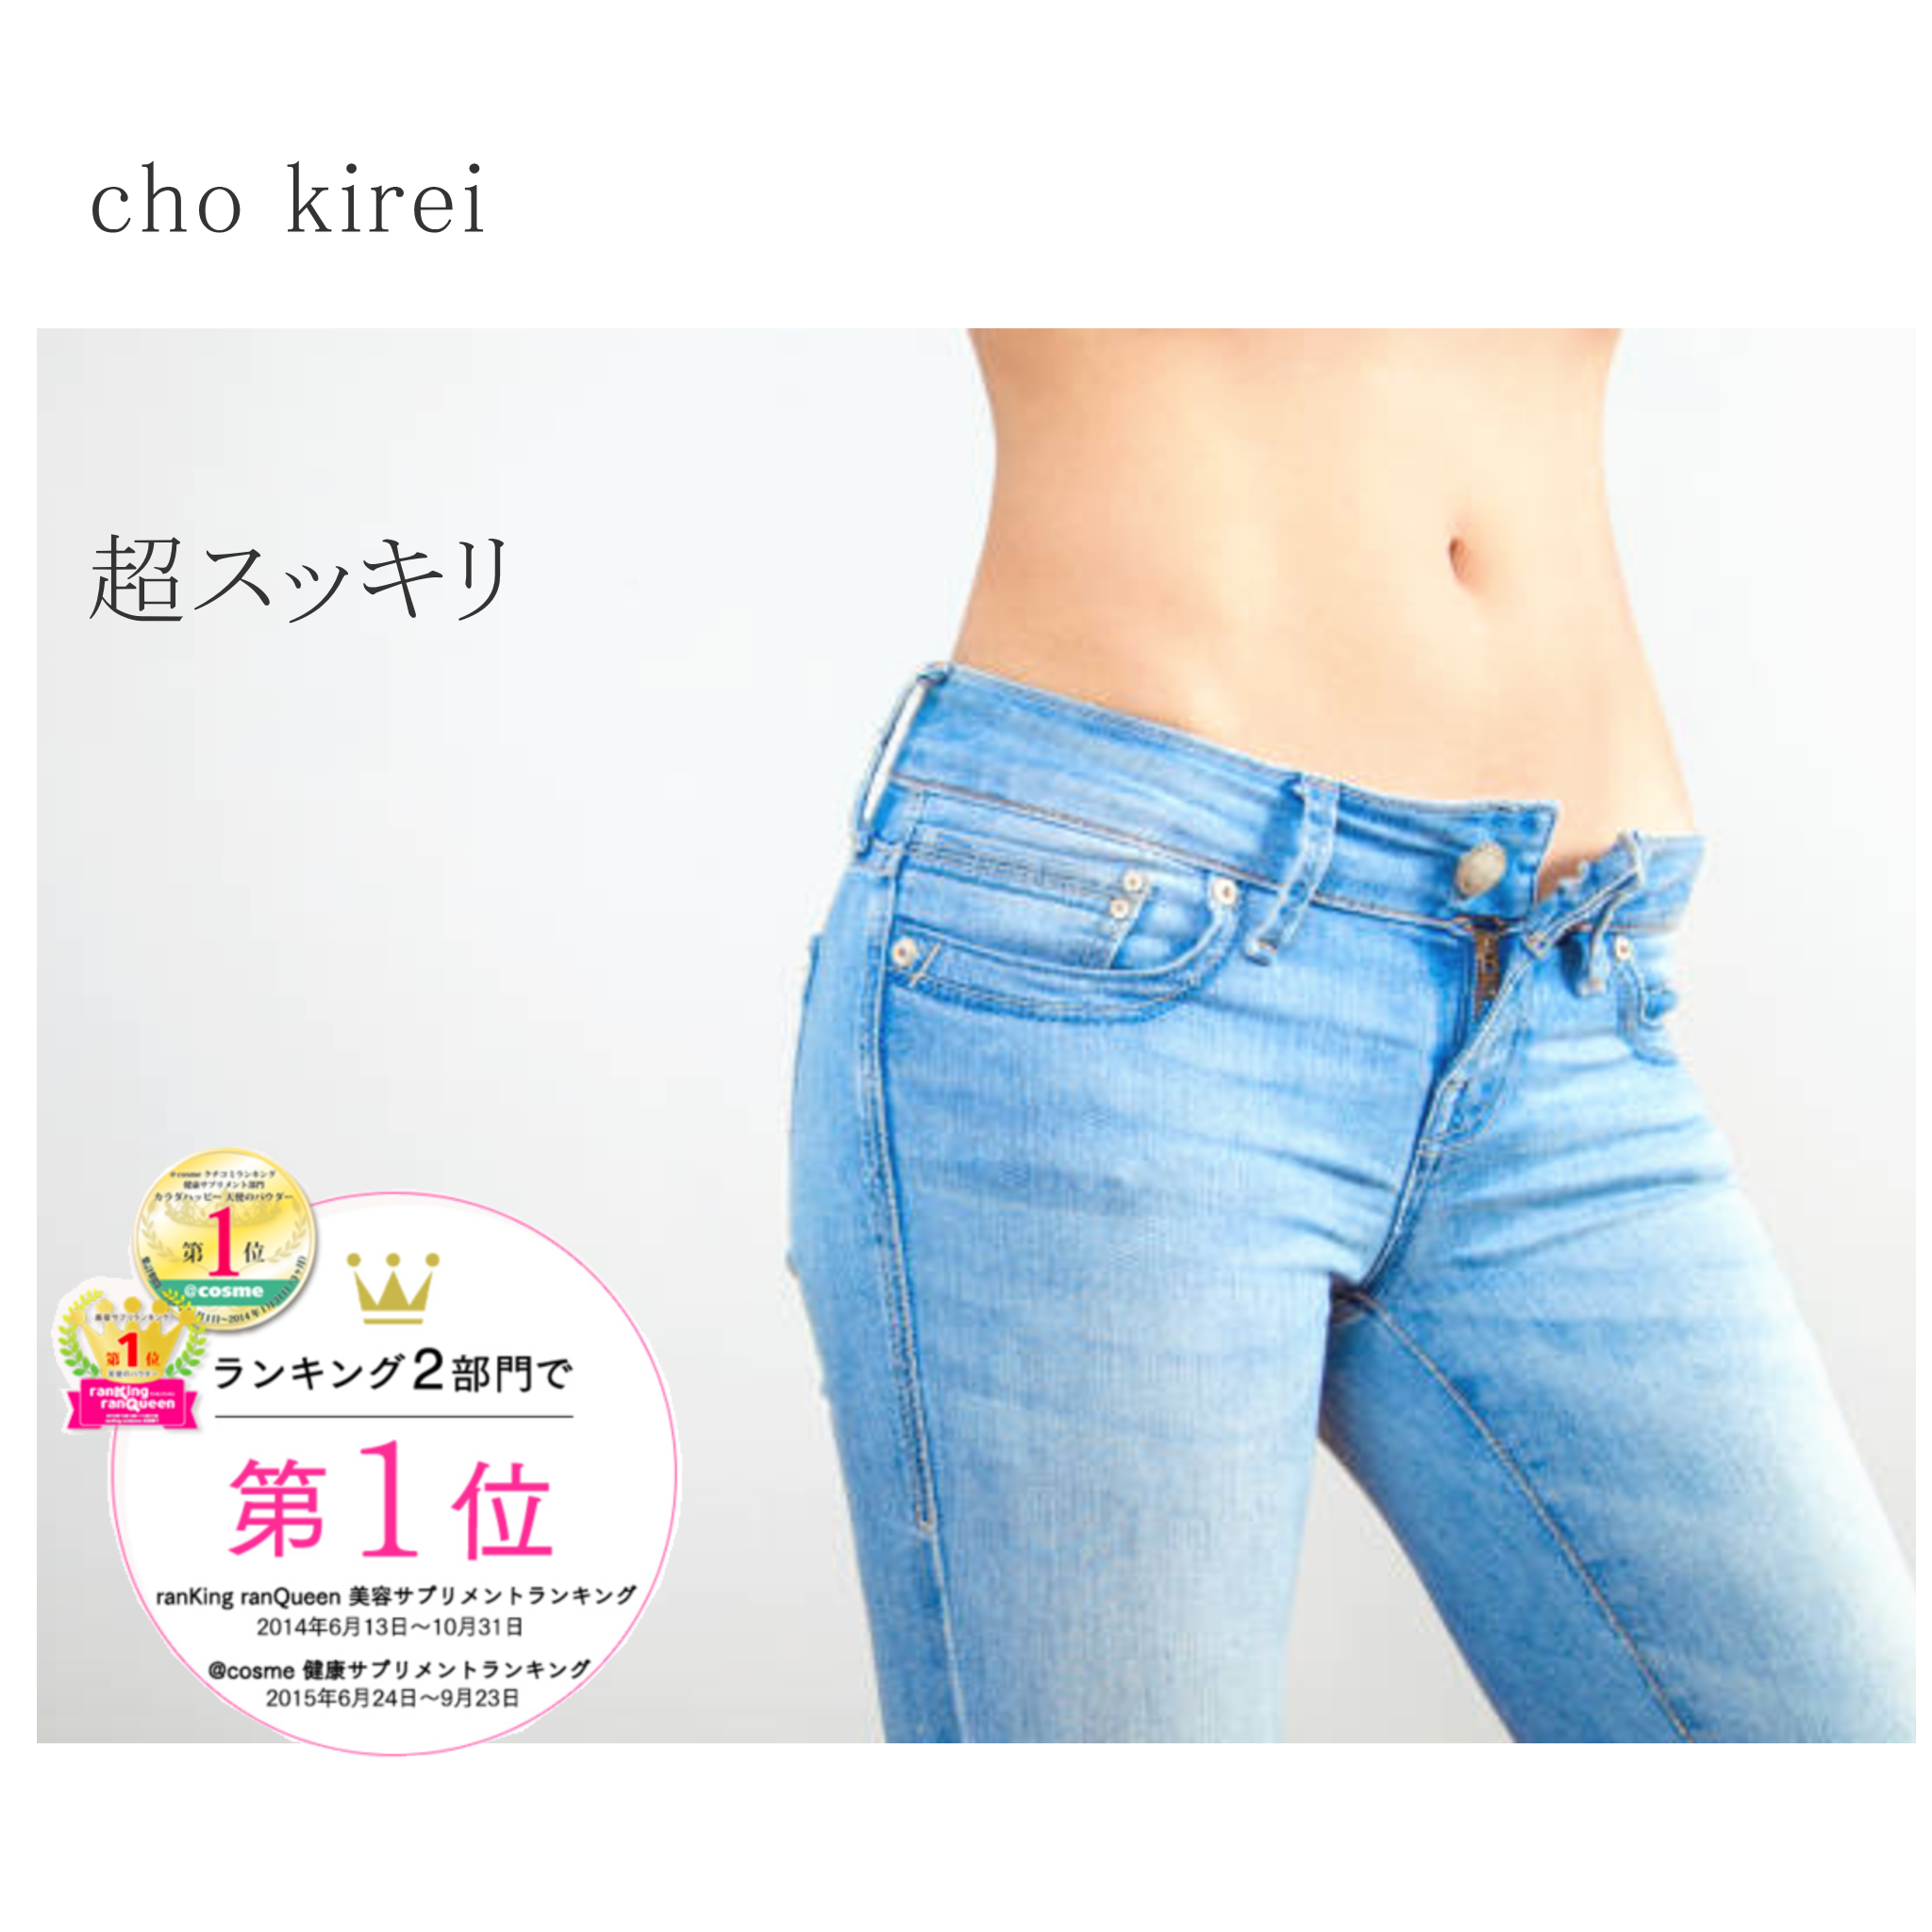 Fanale 超スッキリ　cho kirei　天使のパウダー 乳酸菌